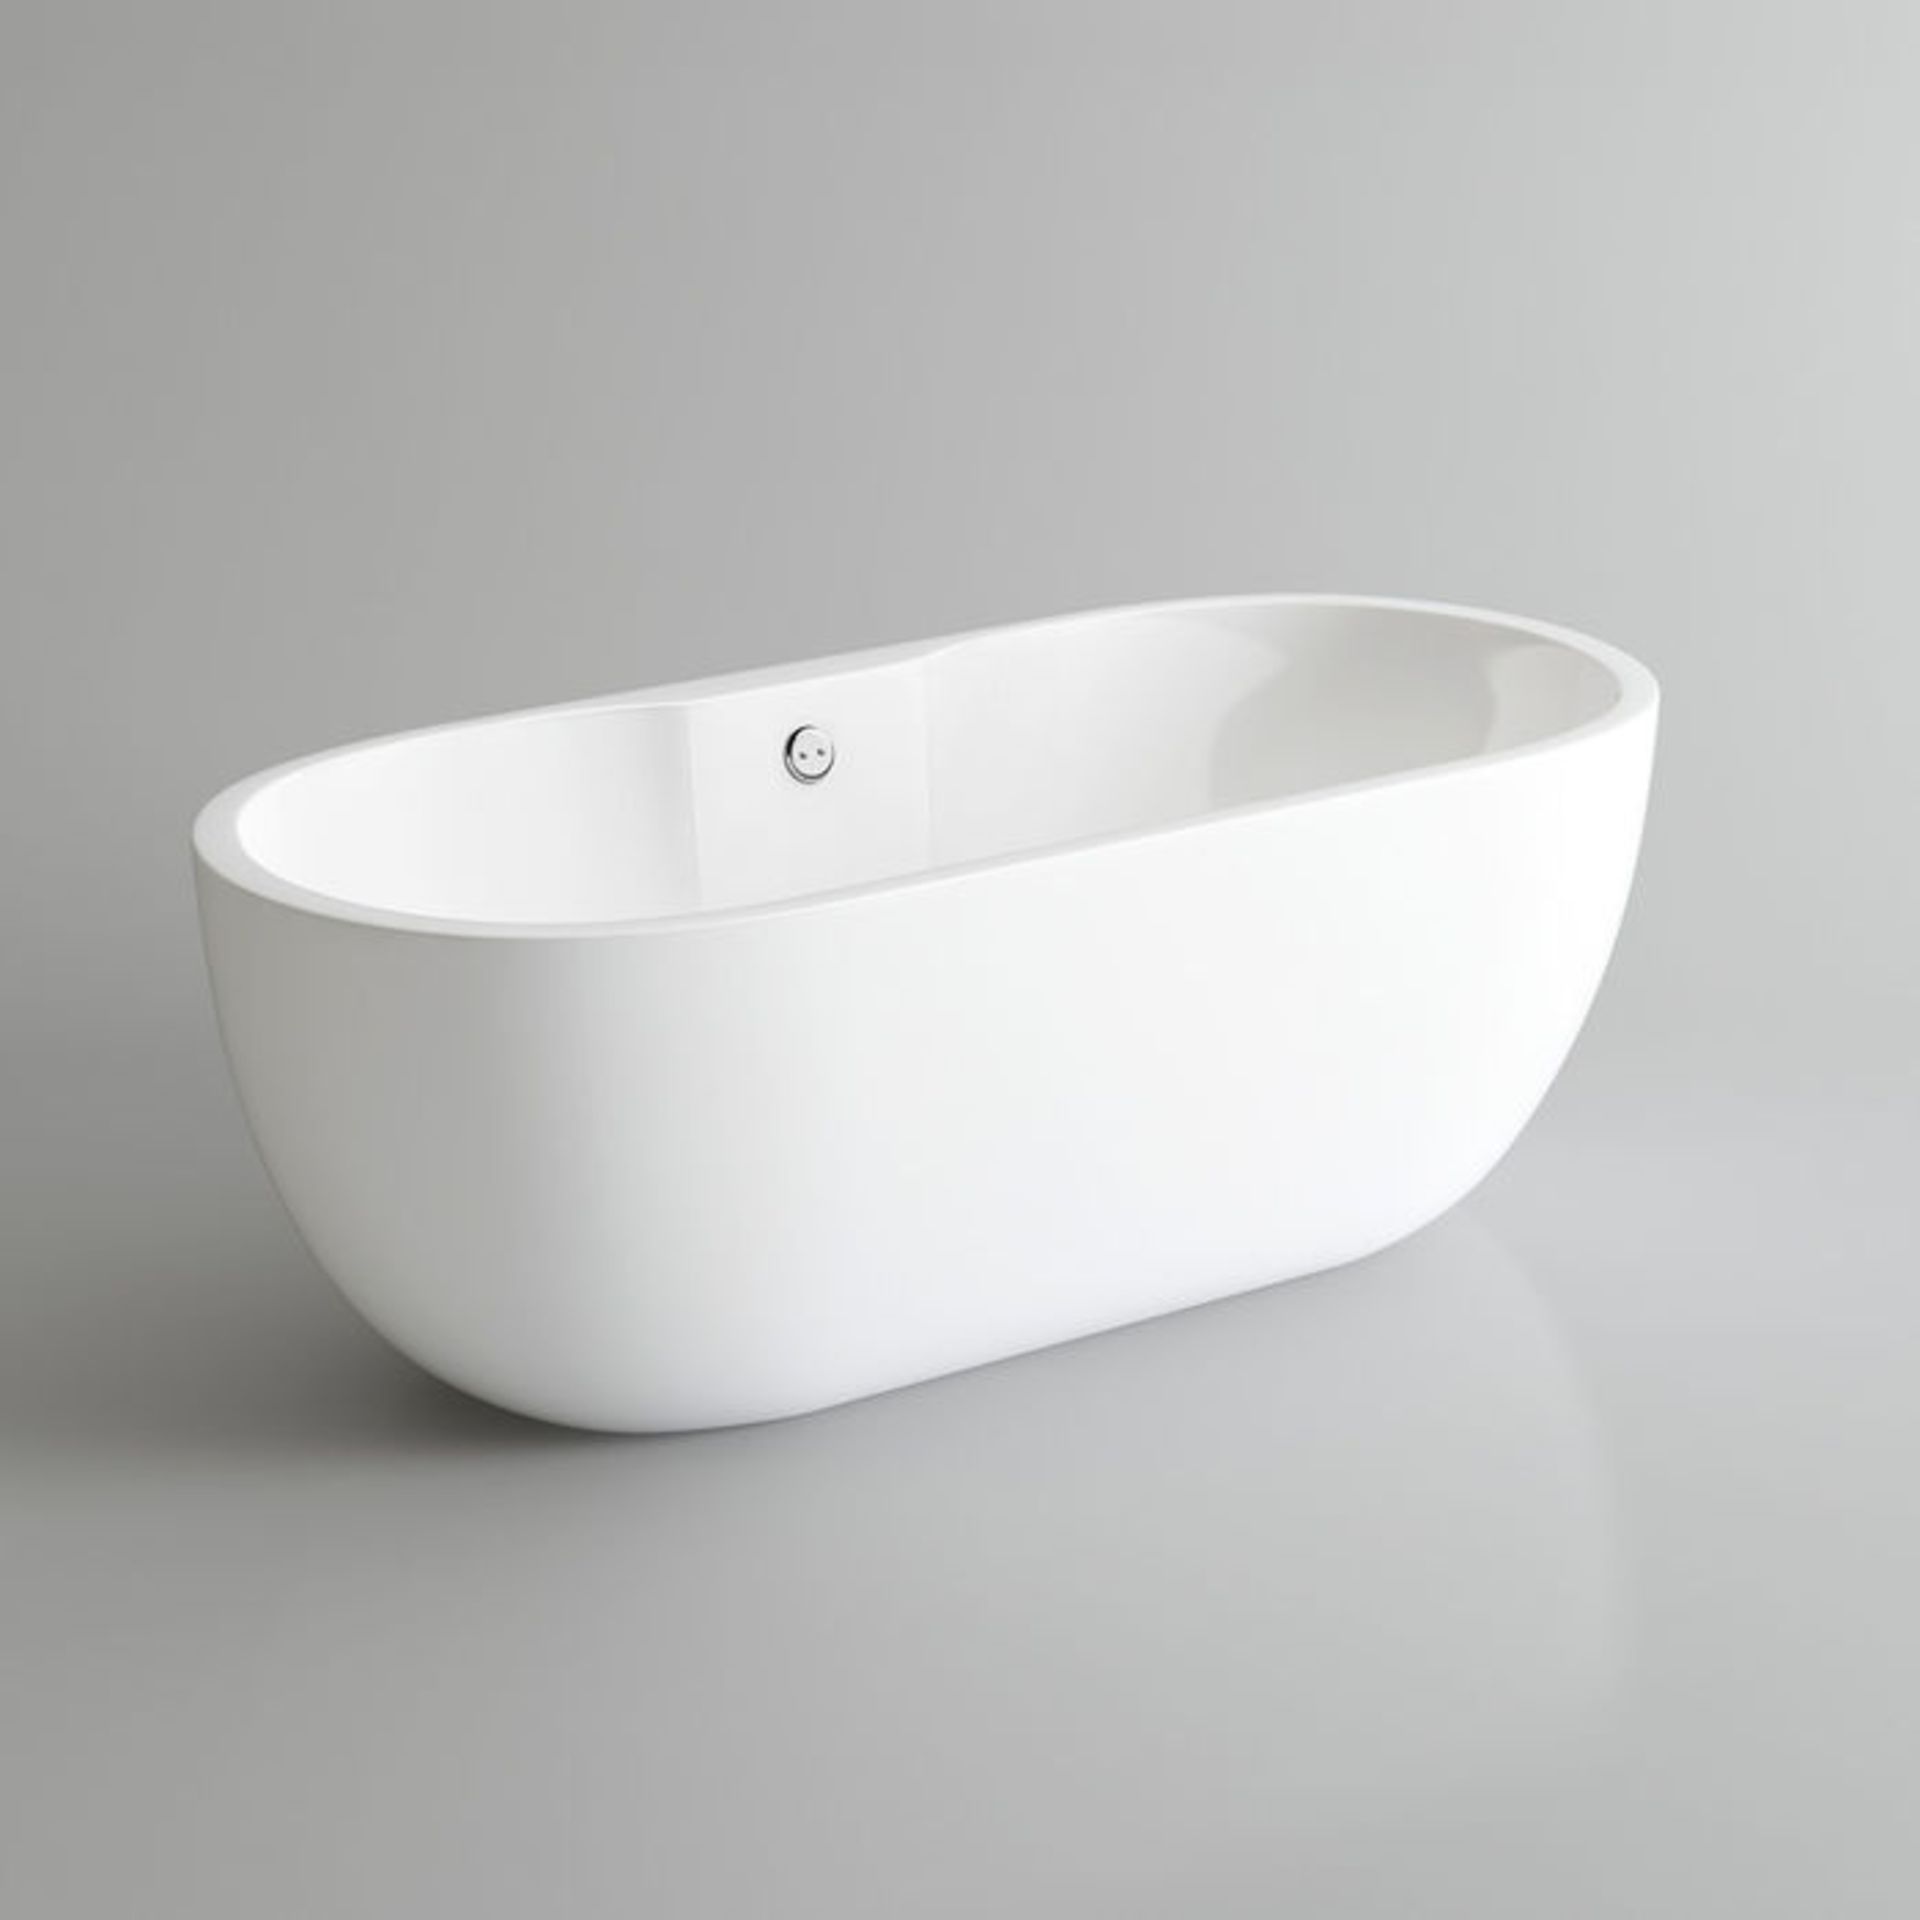 (S5) 1655x750mm Melissa Freestanding Bath - Large. Showcasing contemporary clean lines for a - Image 2 of 3